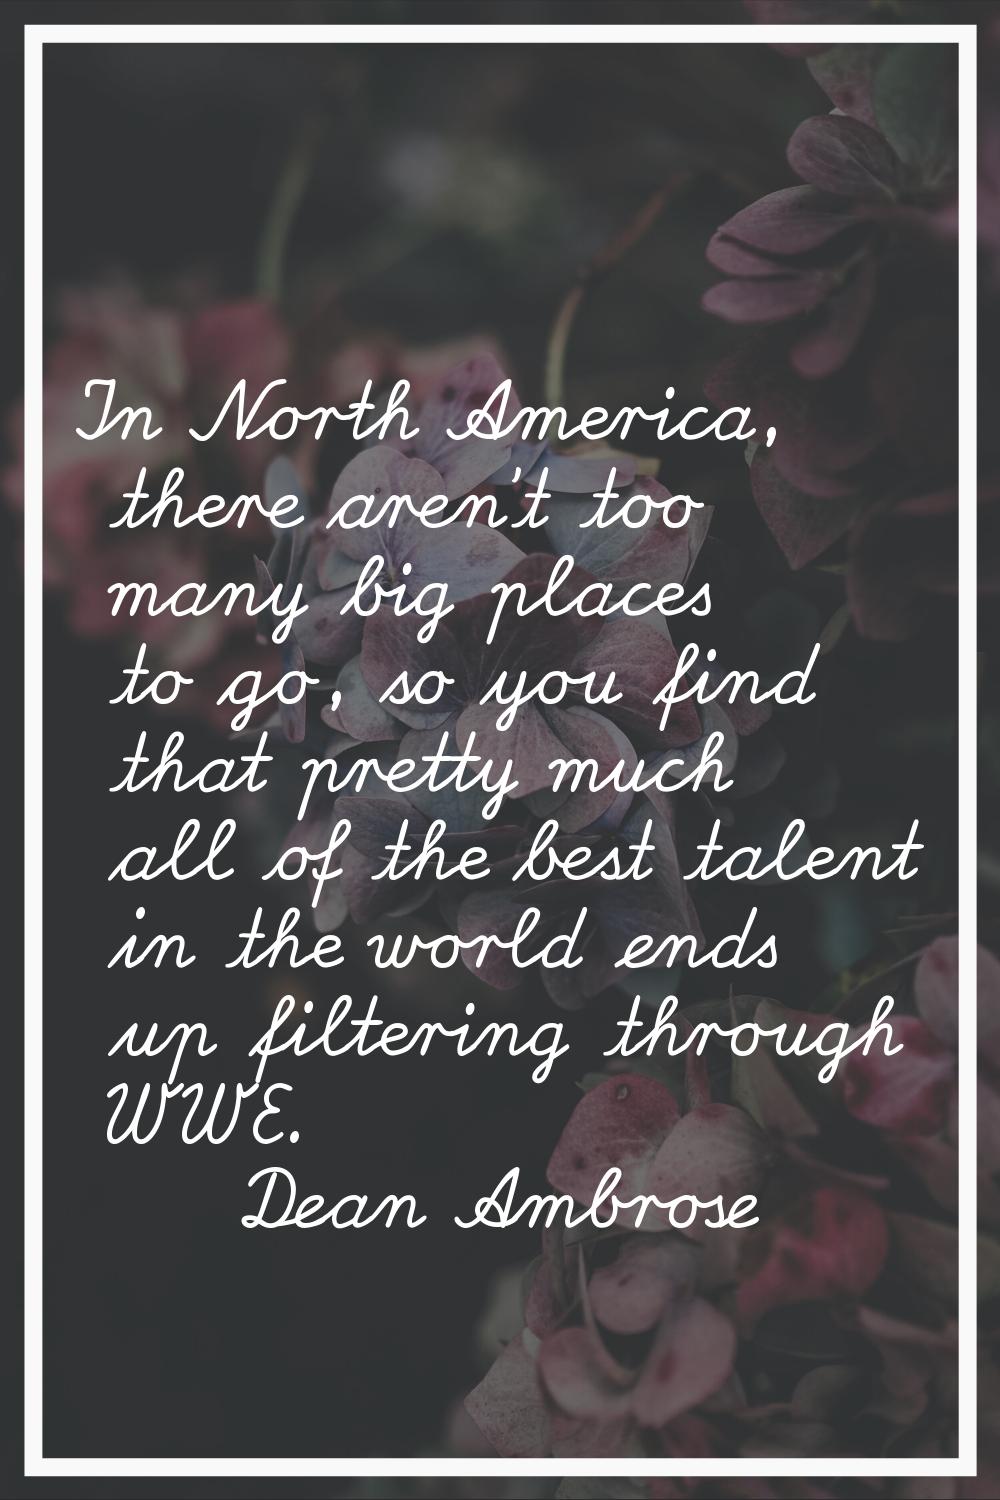 In North America, there aren't too many big places to go, so you find that pretty much all of the b